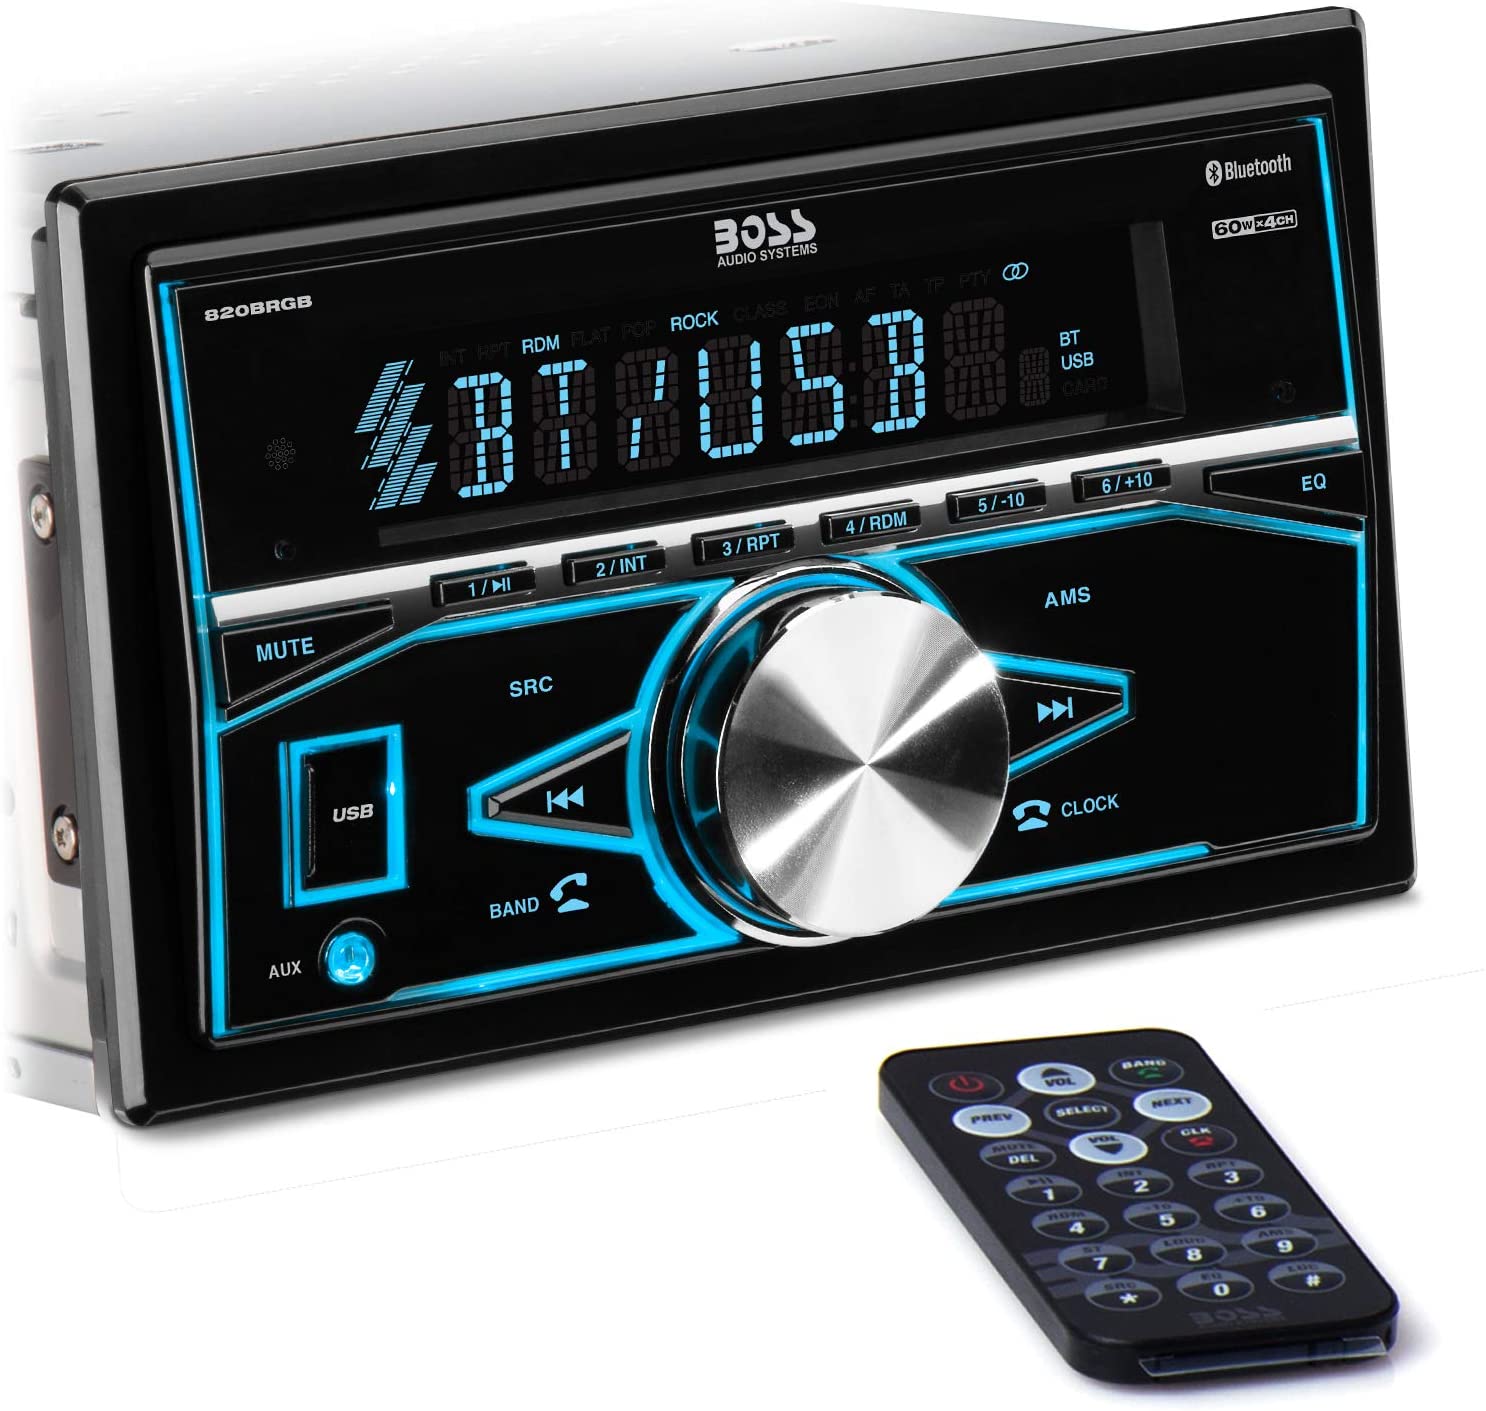 BOSS 820BRGB Audio Systems Car Stereo  Best Double Din With Backup Camera 